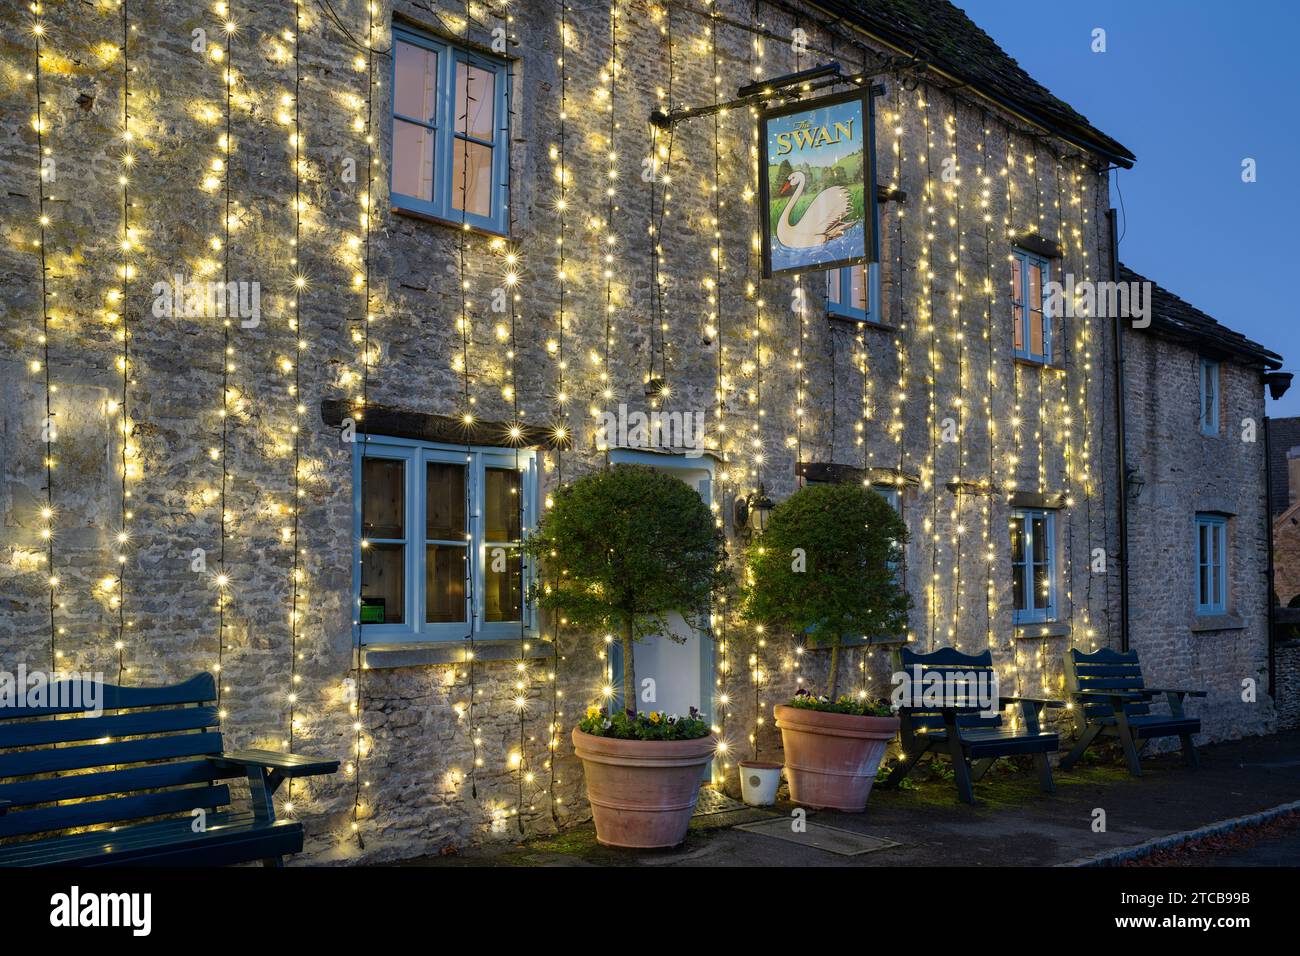 Christmas lights on The Swan pub at dusk. Southrop. Cotswolds, Gloucestershire, England Stock Photo